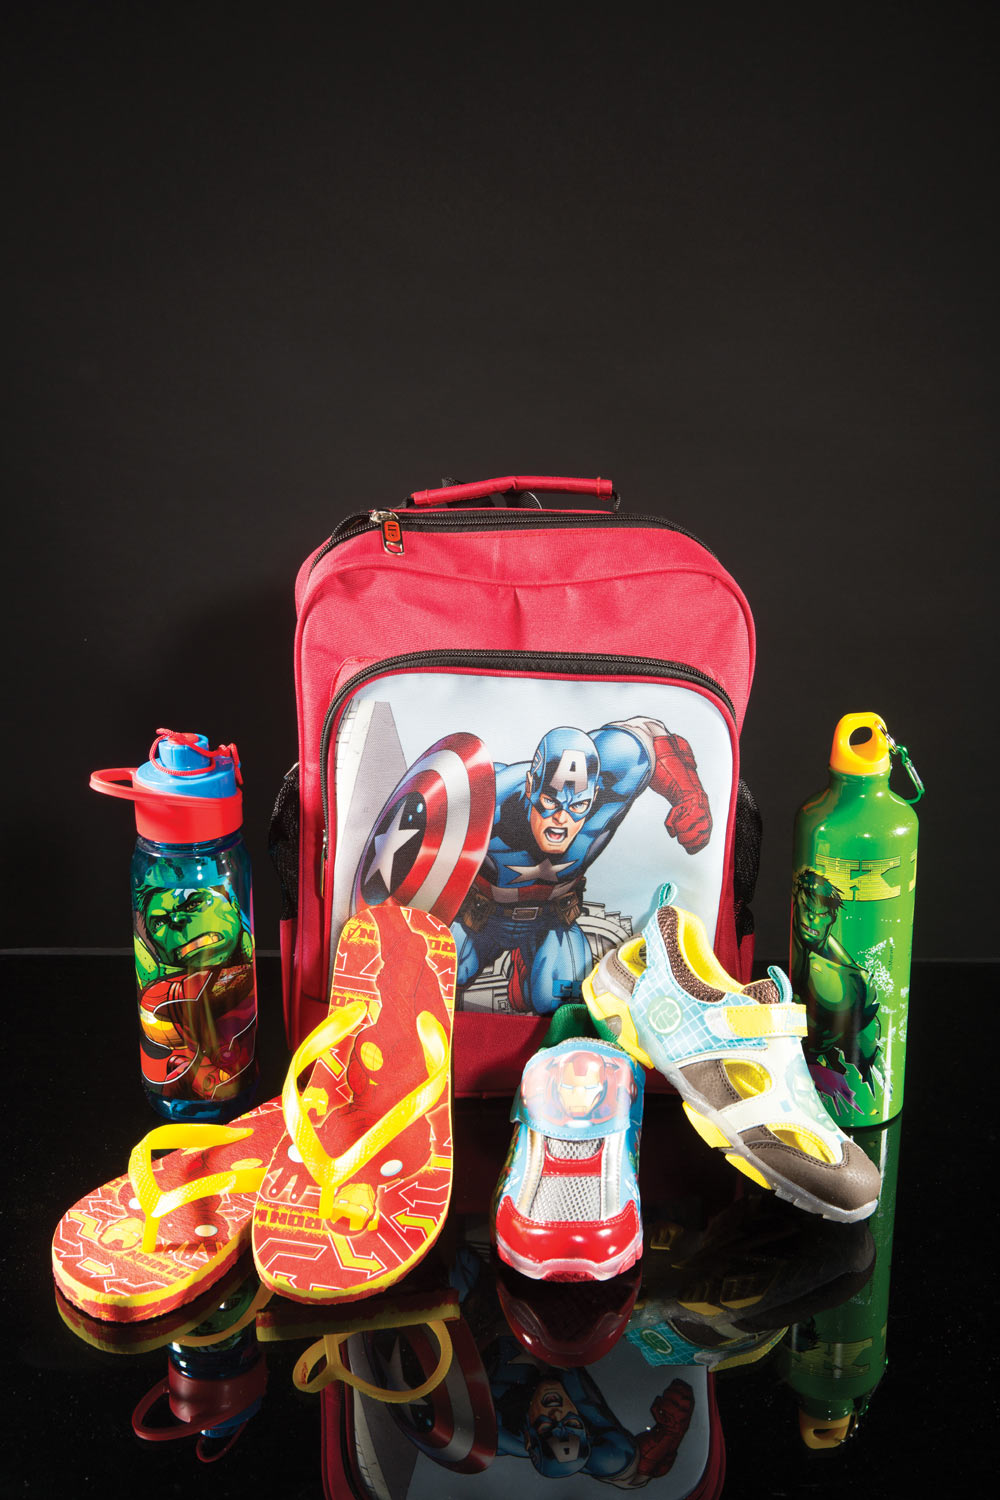 Liberty partners with Disney to launch Liberty Shoes Avengers Collection